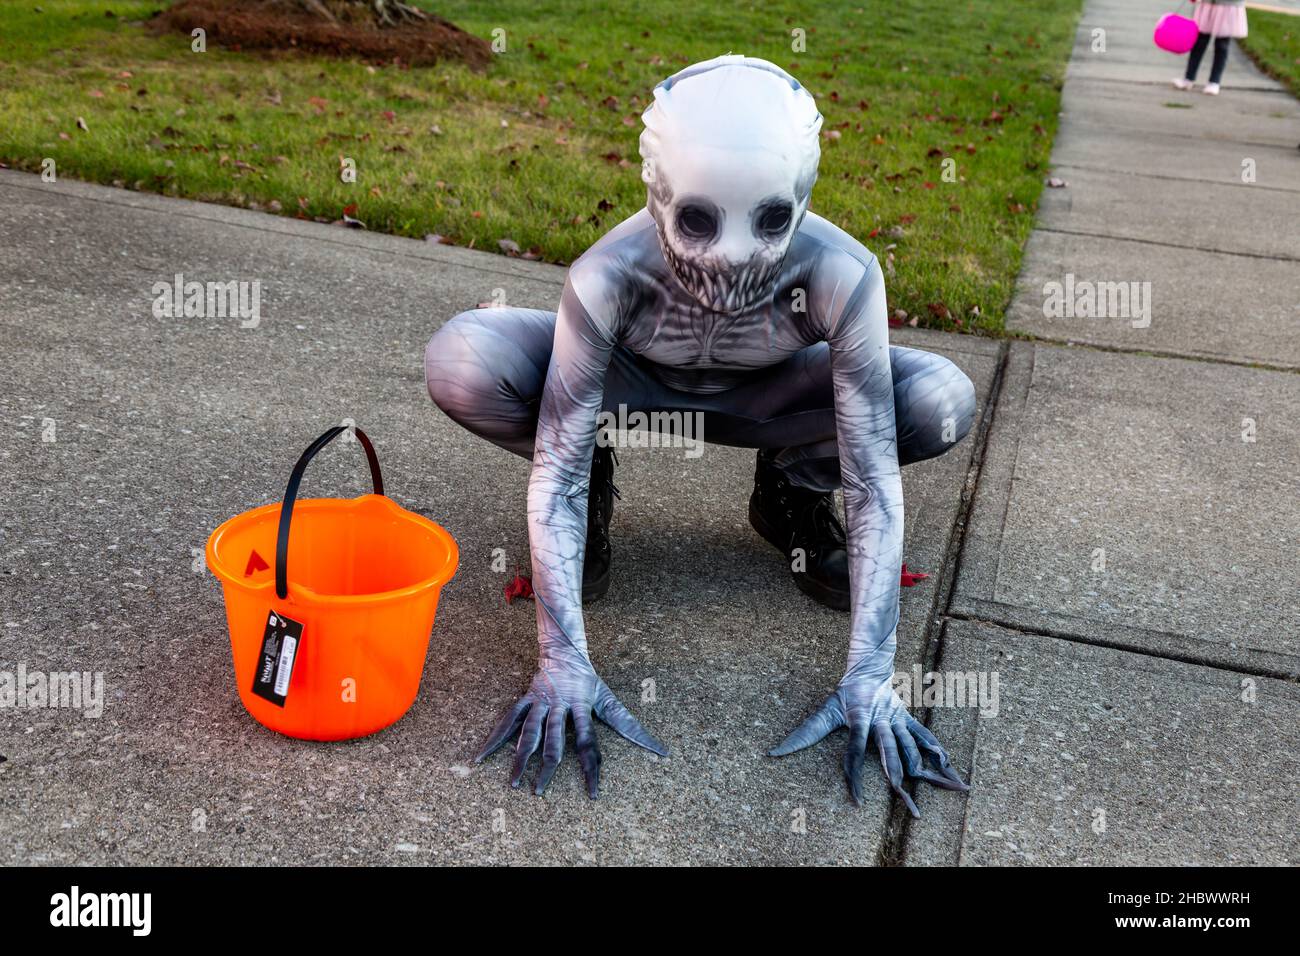 A young trick or treater squats on the driveway as he celebrates Halloween in a scary zentai zombie costume. Stock Photo